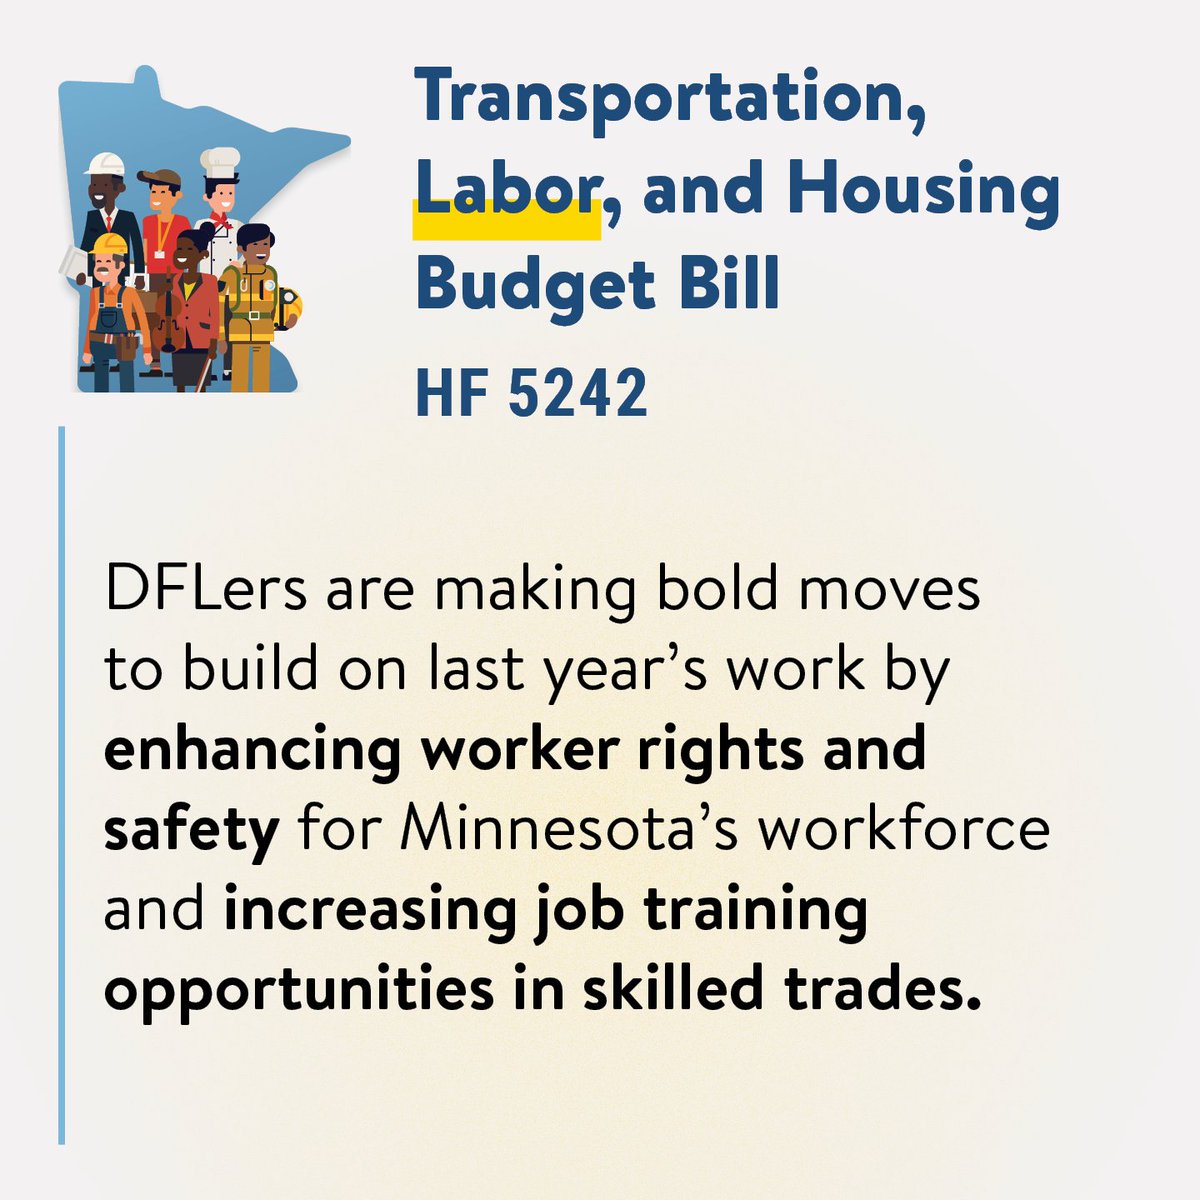 House DFLers continue to move Minnesota transportation into the future! Our supplemental budget invests in road & rail safety, public transit, climate action + more so all Minnesotans can have access to safe, accessible transportation no matter how they get around. #mnleg 🚂🚗🚎